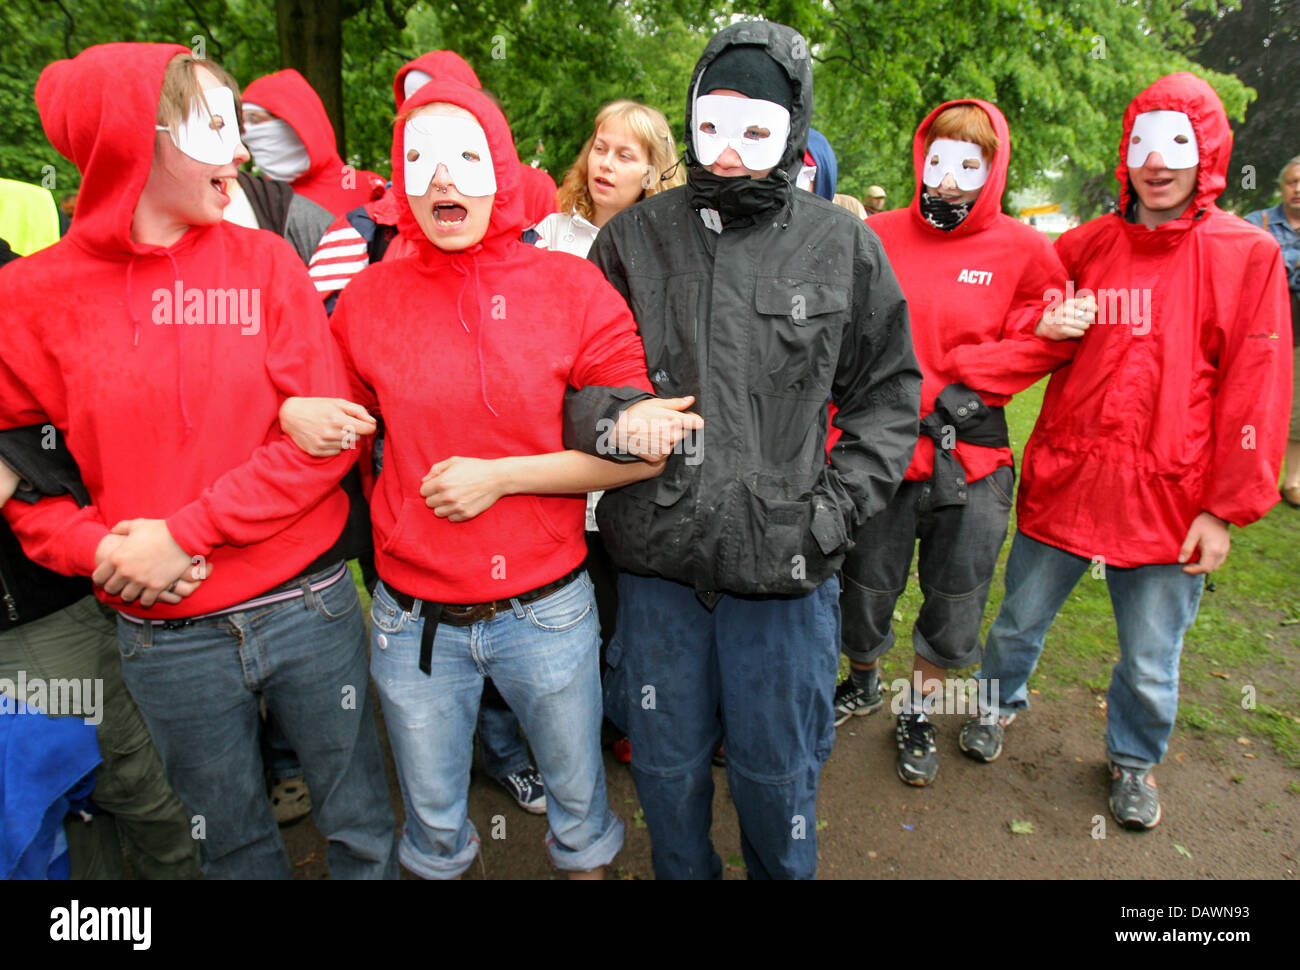 Disguised members of the G8 opposition group 'Kampagne Block G8' demonstrate their road blockade tactics in Bad Doberan, Germany, 29 May 2007. The organisation plans to obstruct the G8 heads of state summit by mass blockades of the access roads to the conference hotel and the area within the security fence. Photo: Bernd Wuestneck Stock Photo